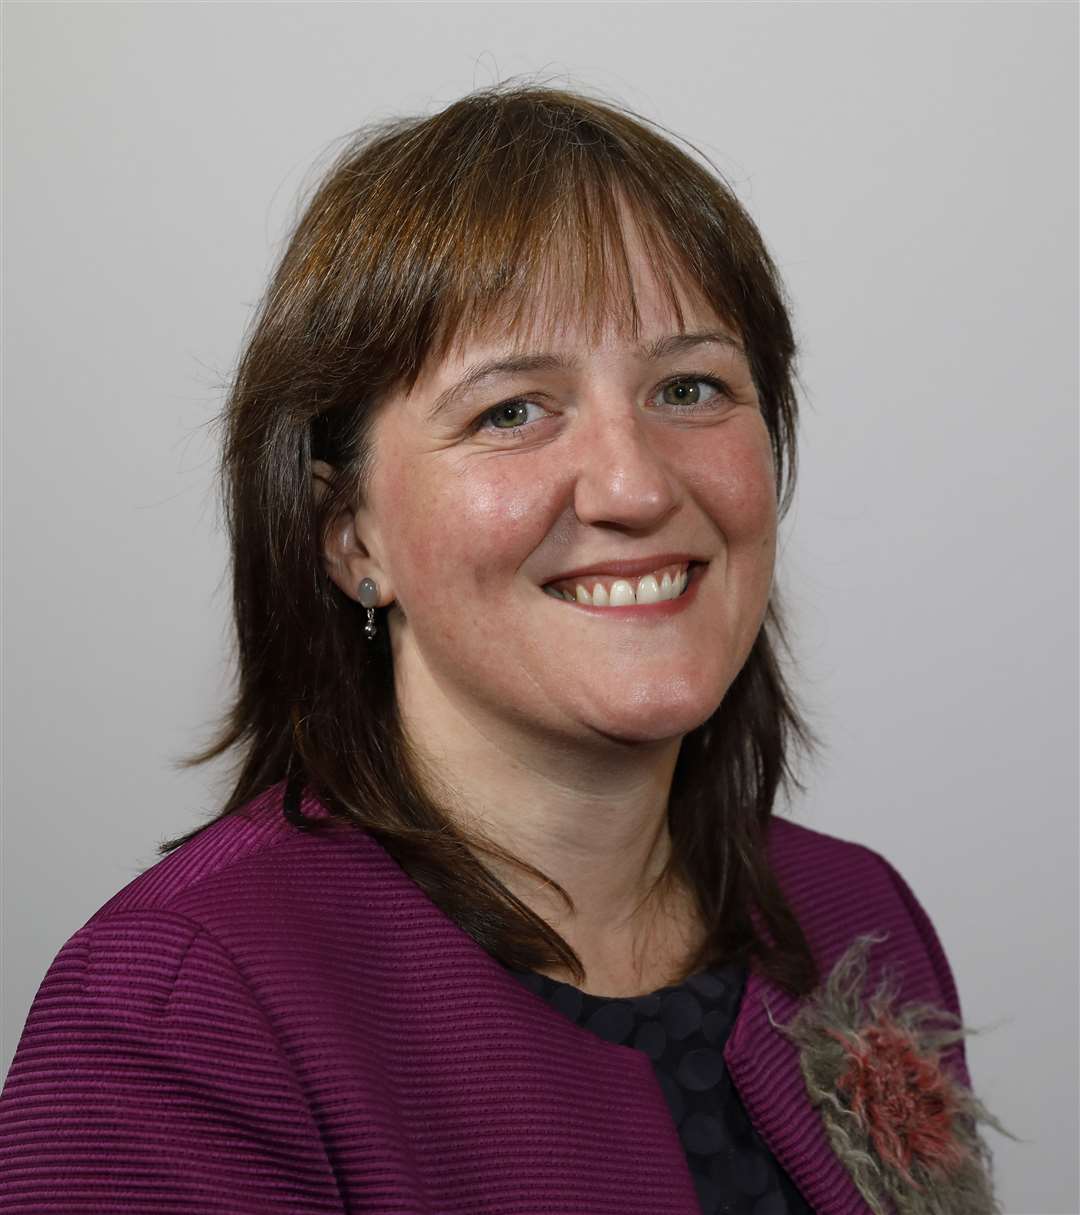 Minister for Children and Young People, Maree Todd